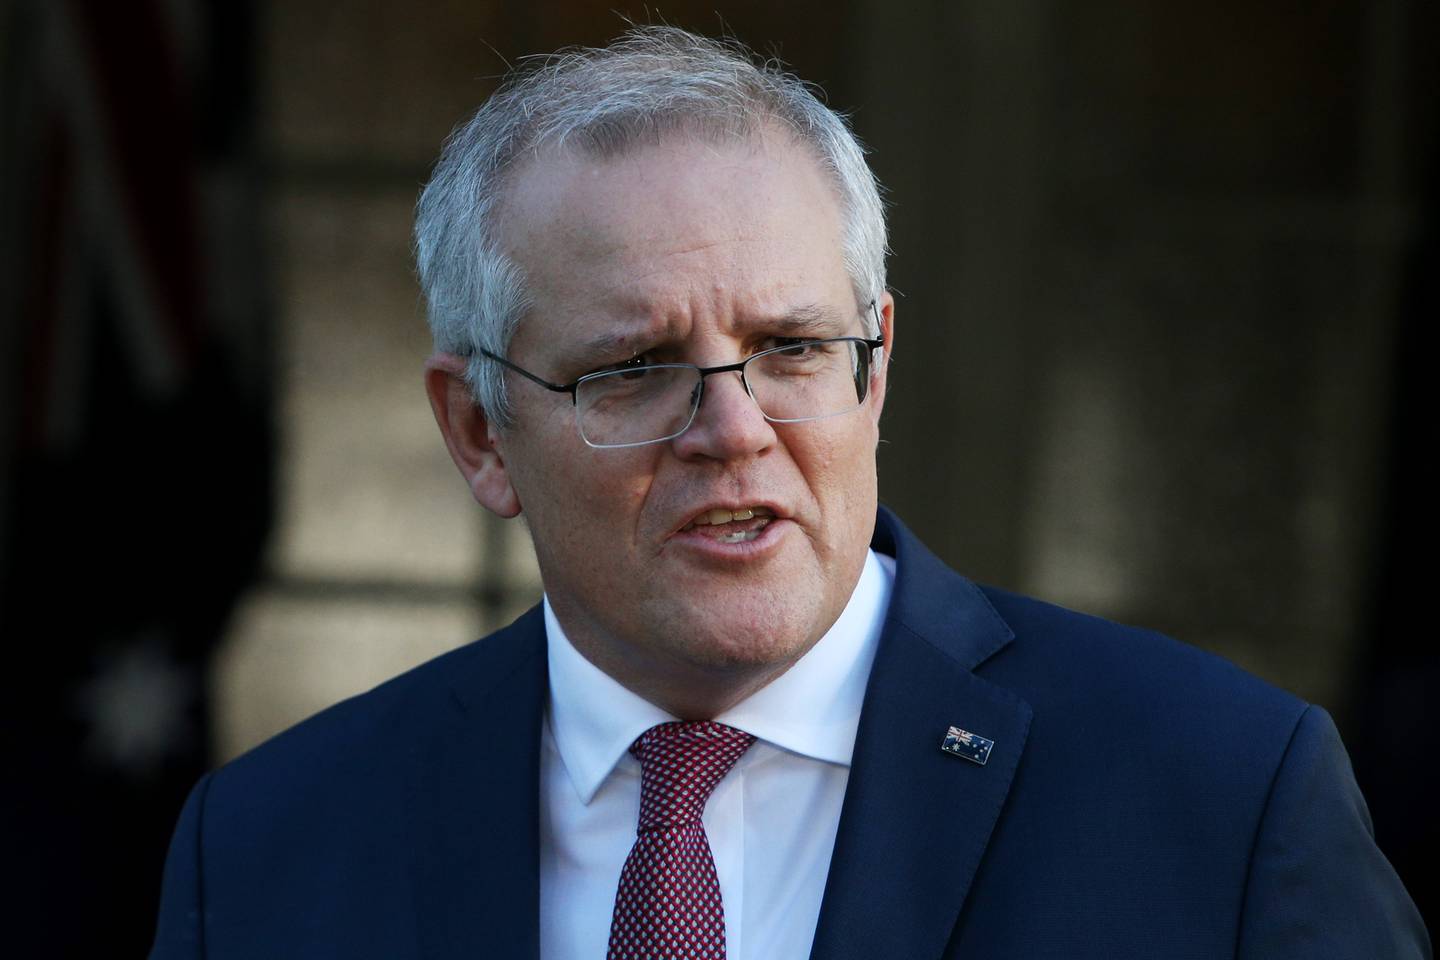 Australian Prime Minister Scott Morrison has previously warned of "tensions in the region". Photo / Getty Images